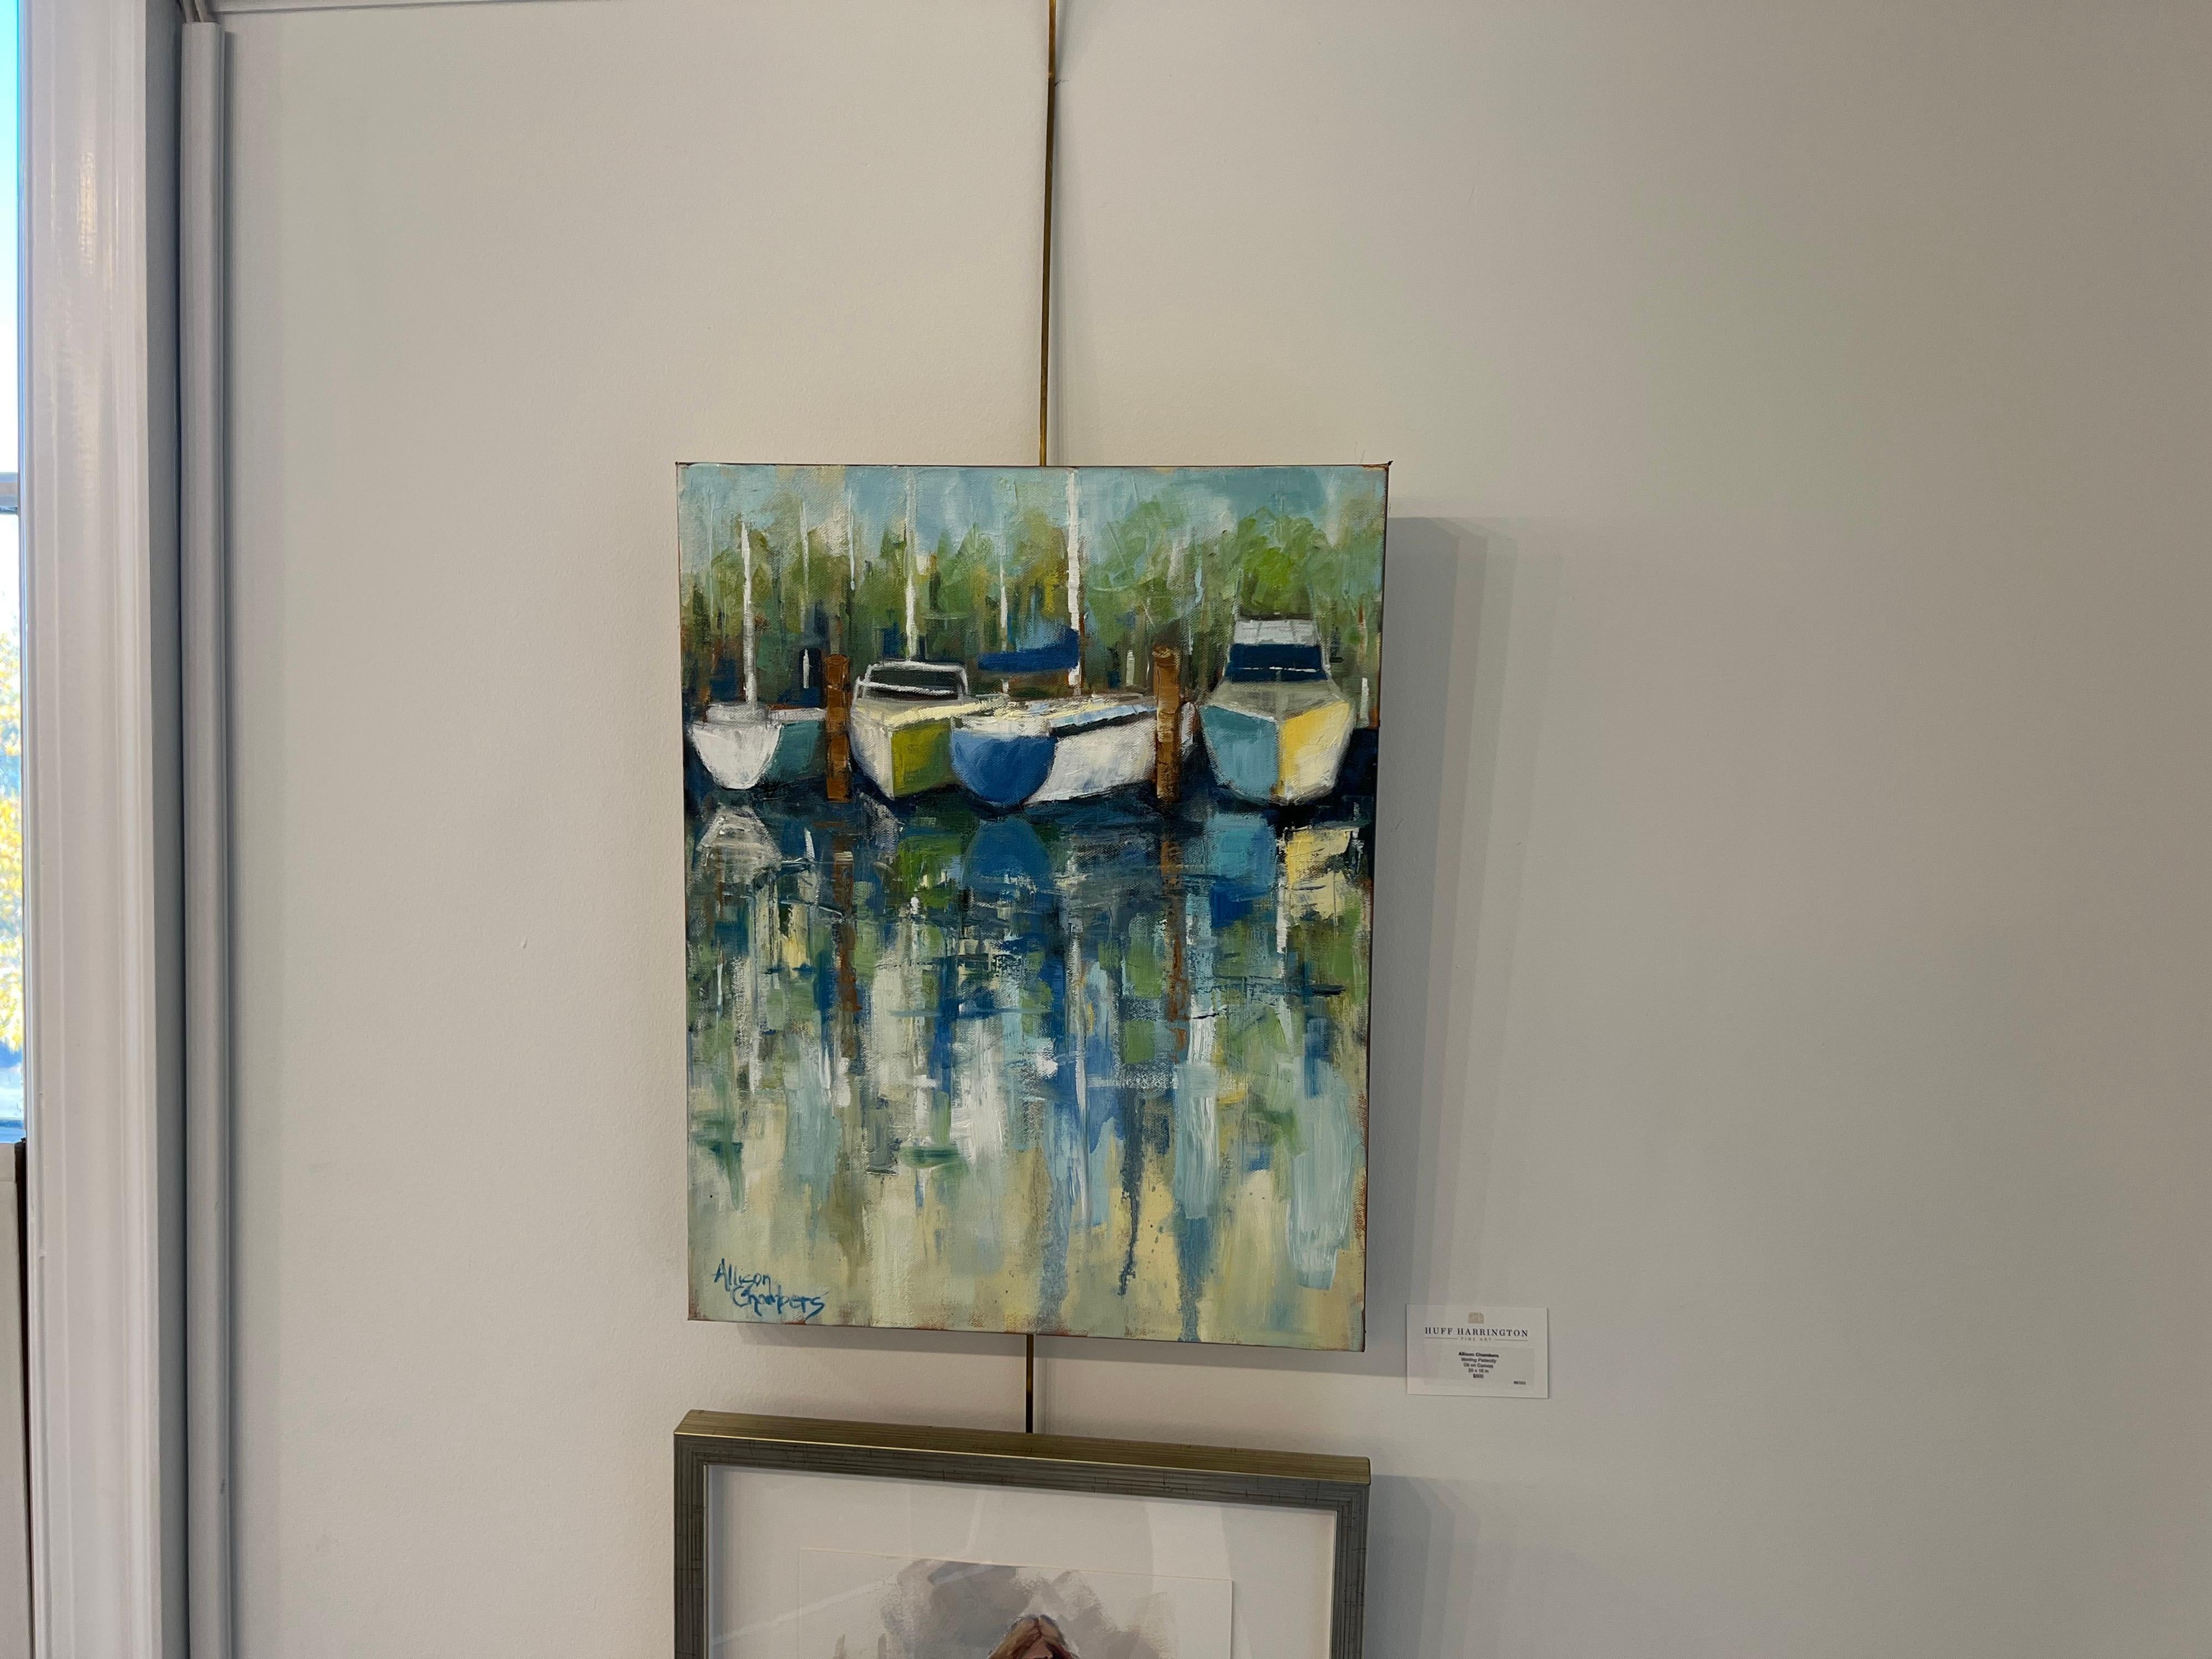 'Waiting Patiently' is a petite oil on canvas painting of vertical format created by American artist Allison Chambers in 2021. Featuring a palette made of green, blue, cream and brown tones among others, this painting depicts a harbor with sailboats